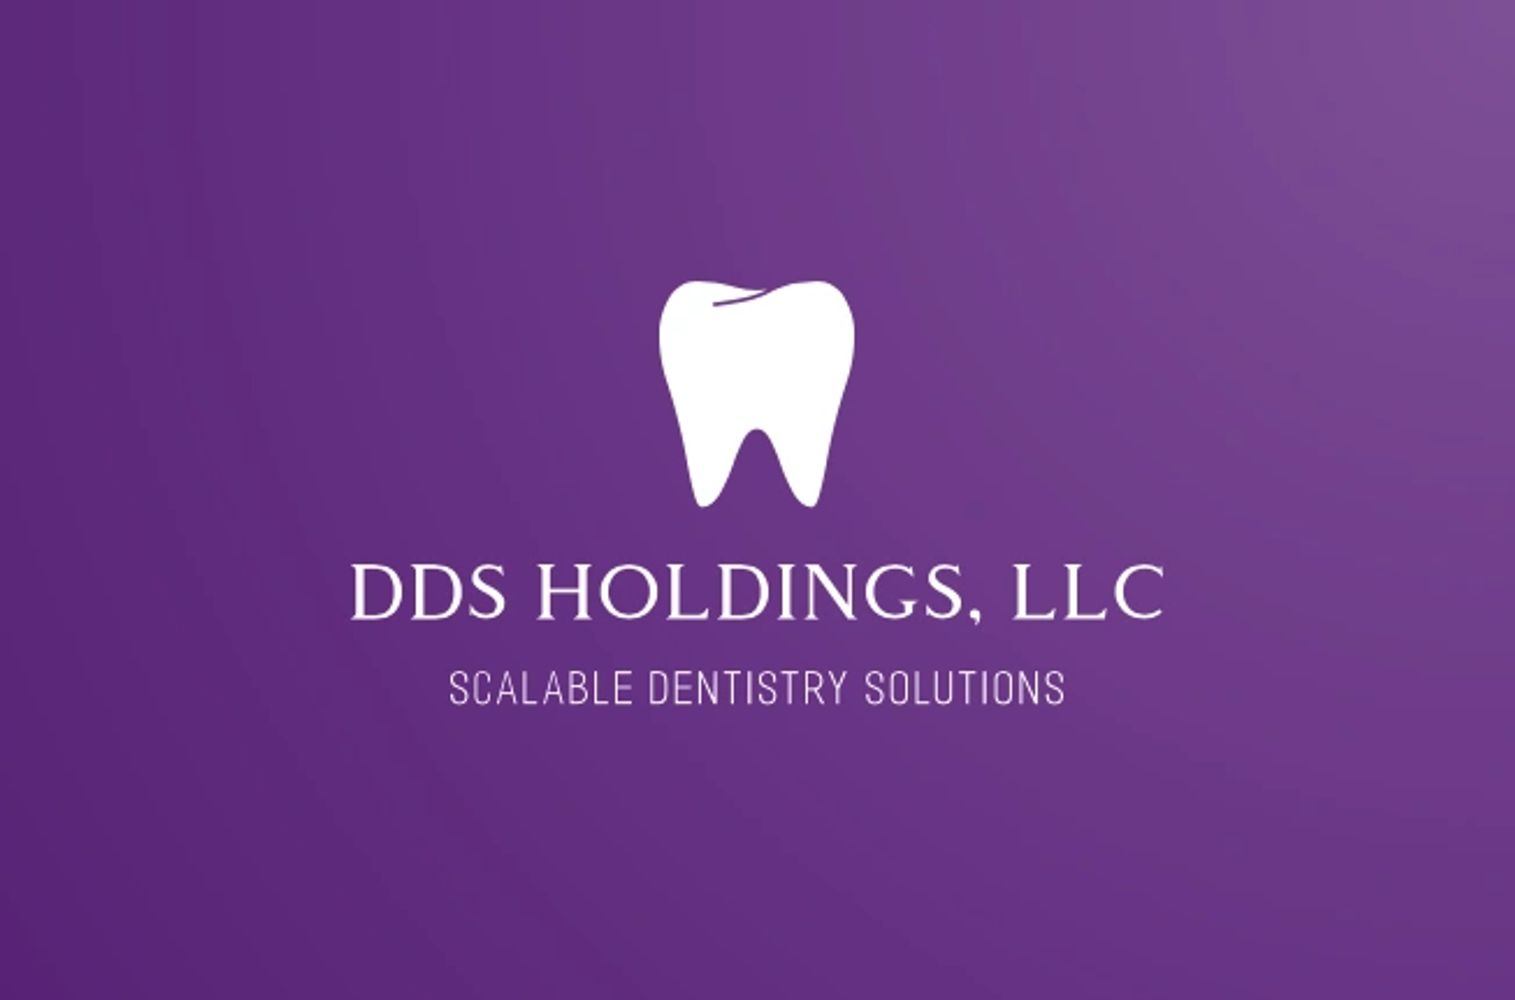 SCALABLE DENTISTRY SOLUTIONS 